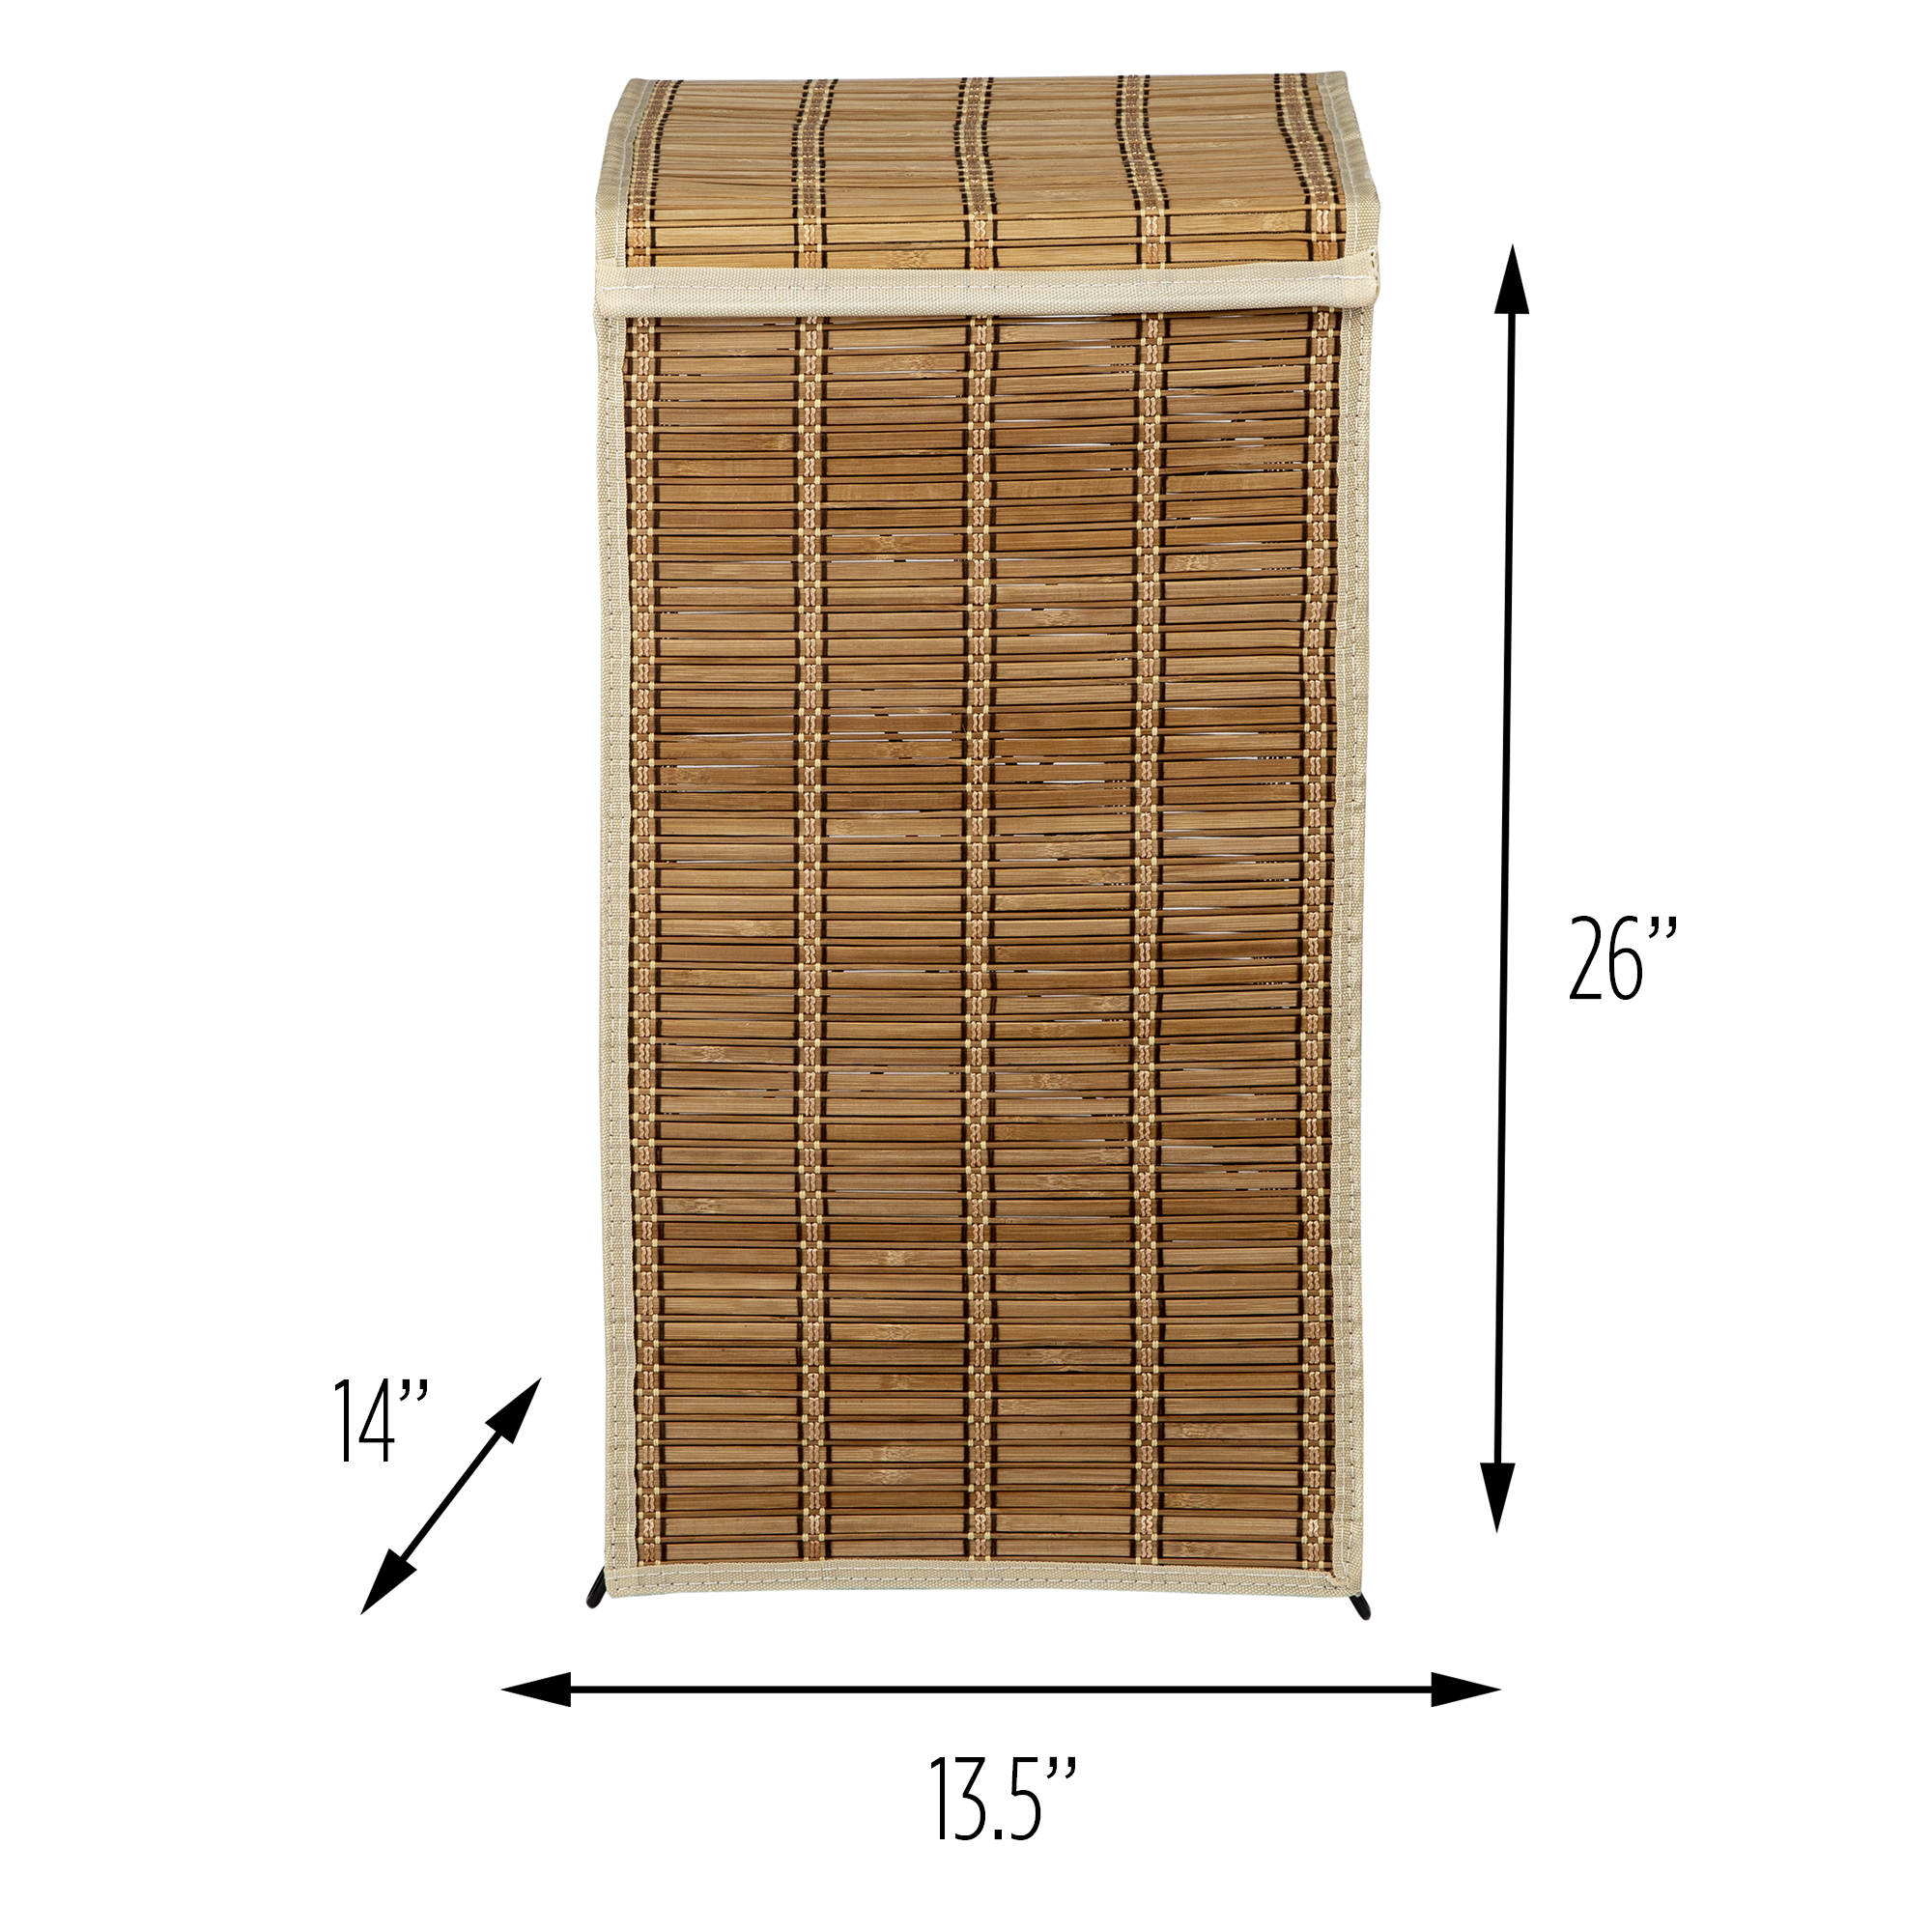 Honey-Can-Do Bamboo Wicker Laundry Hamper with Lid, Natural - image 5 of 5